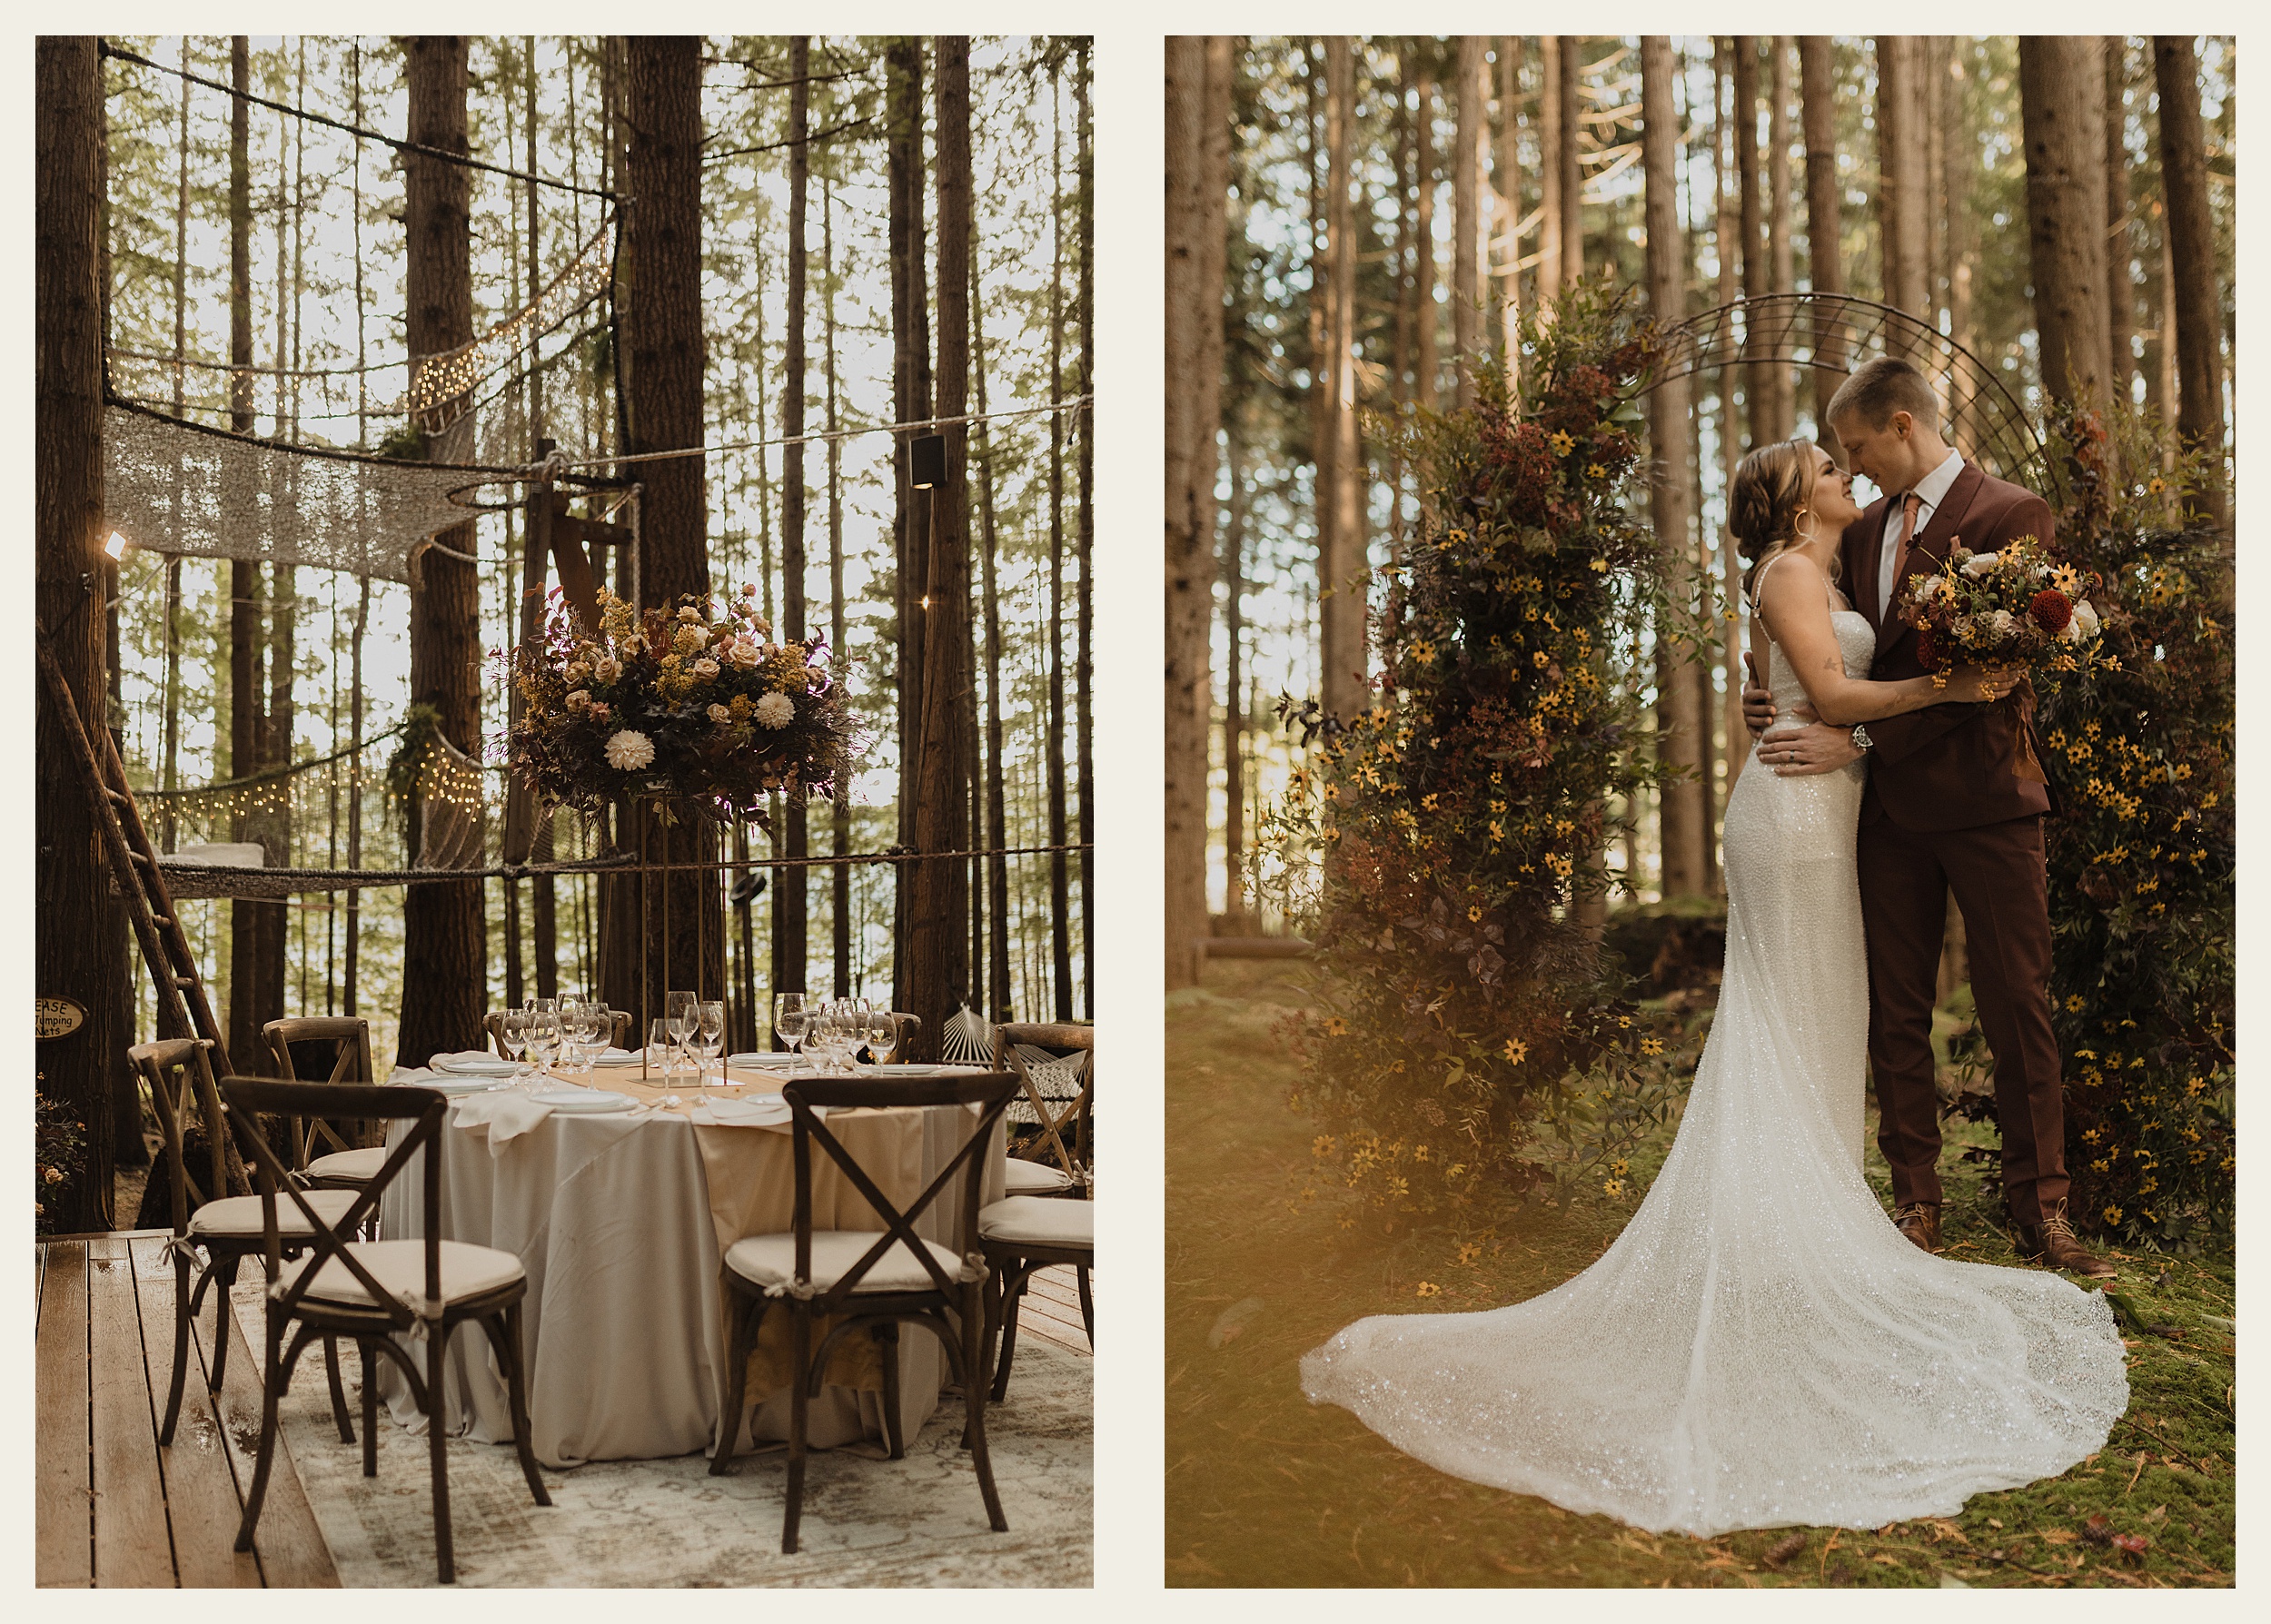 bride and groom holding each other
treehouse and emerald forest landscape
